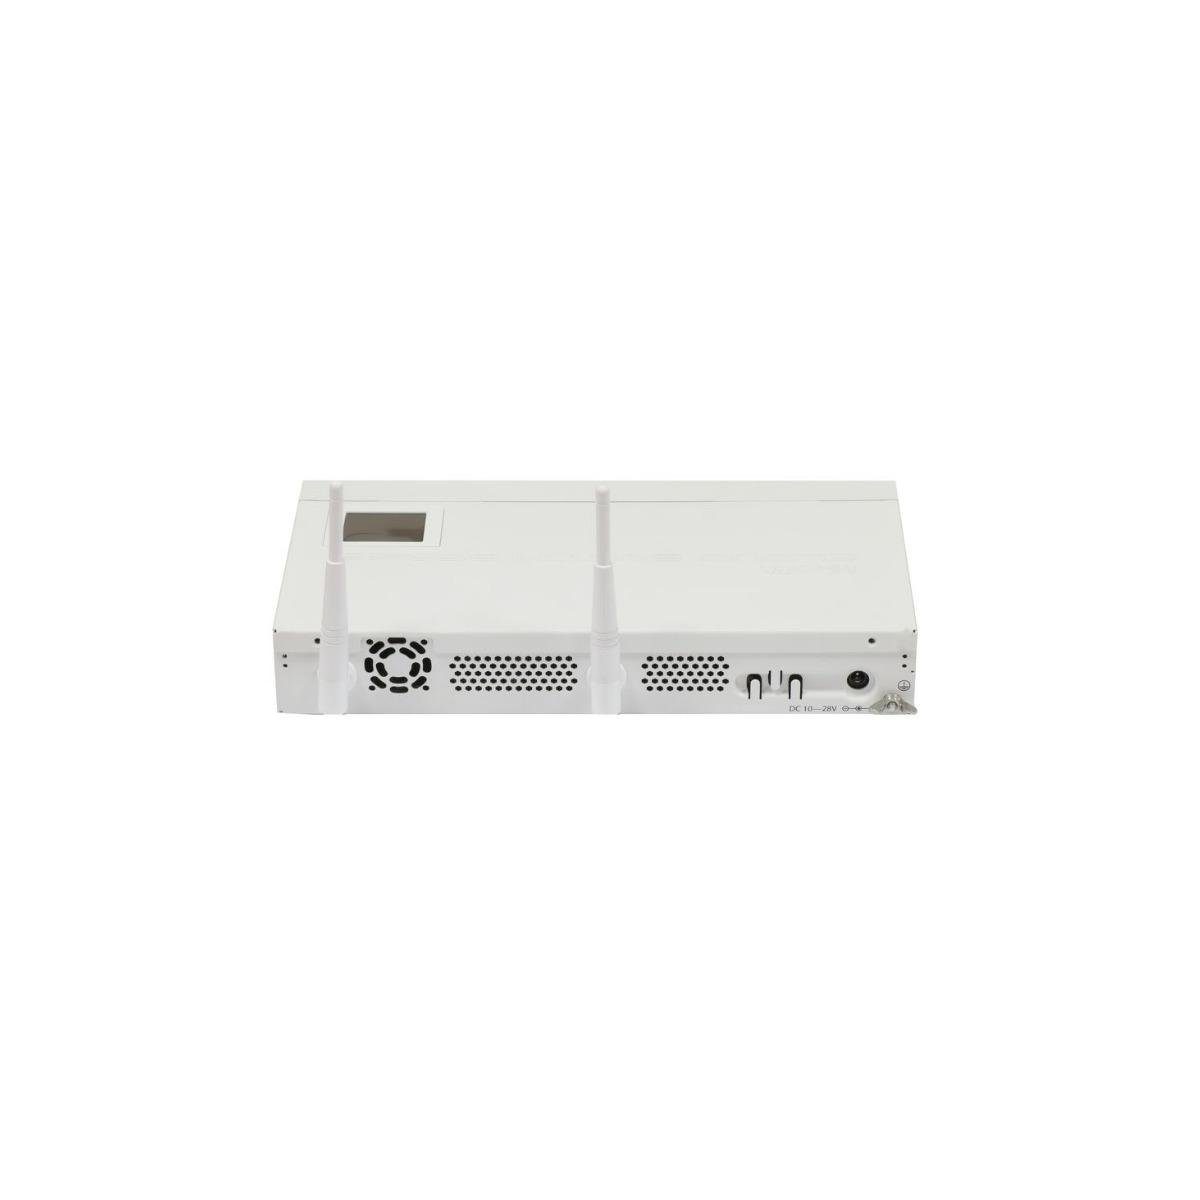 CRS125-24G-1S-2HND-IN Switch, - Cloud MikroTik 600MHz,... Router Netzwerk-Switch